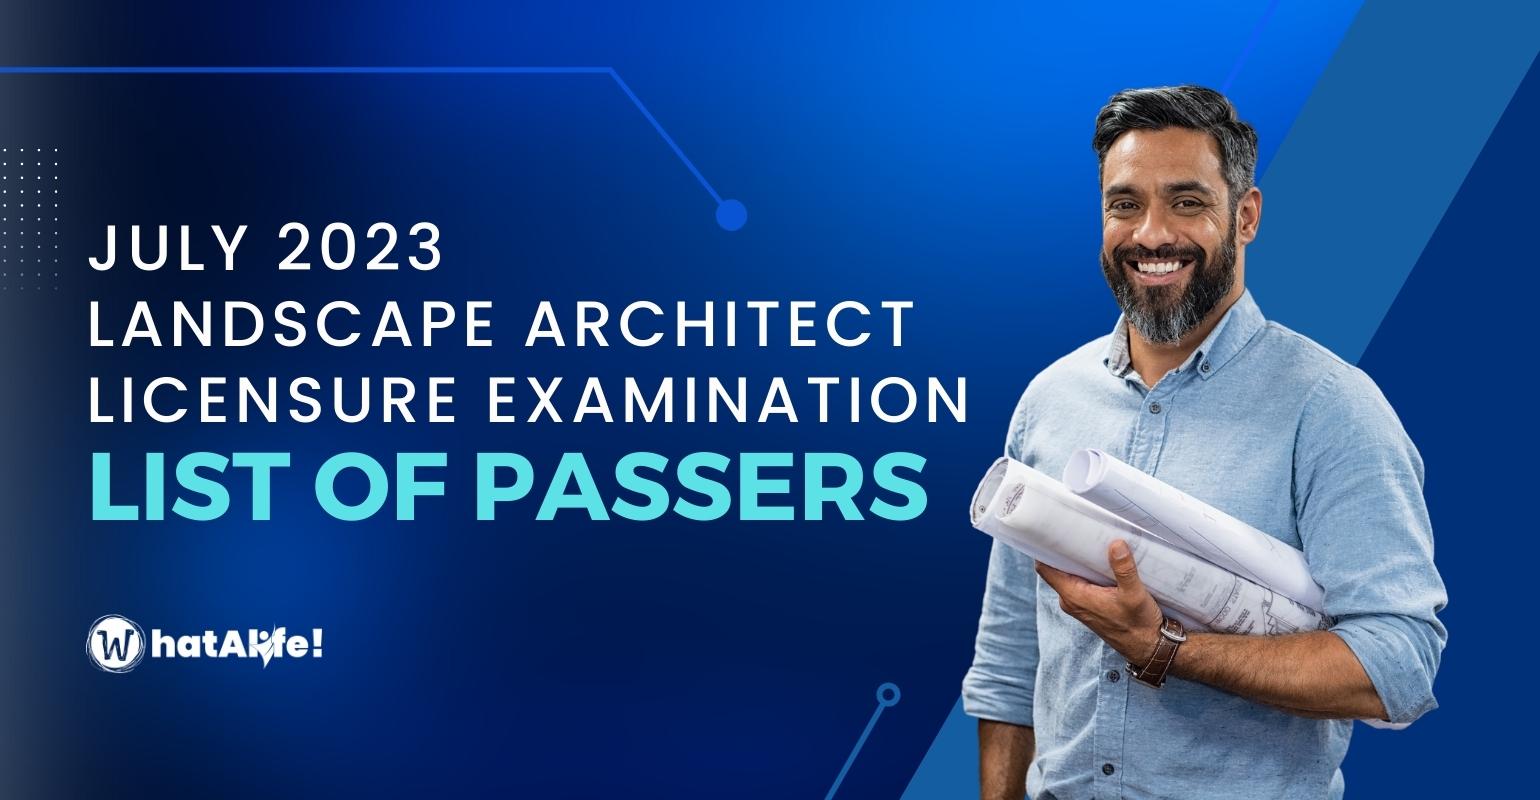 full list of passers july 2023 landscape architect licensure exam results